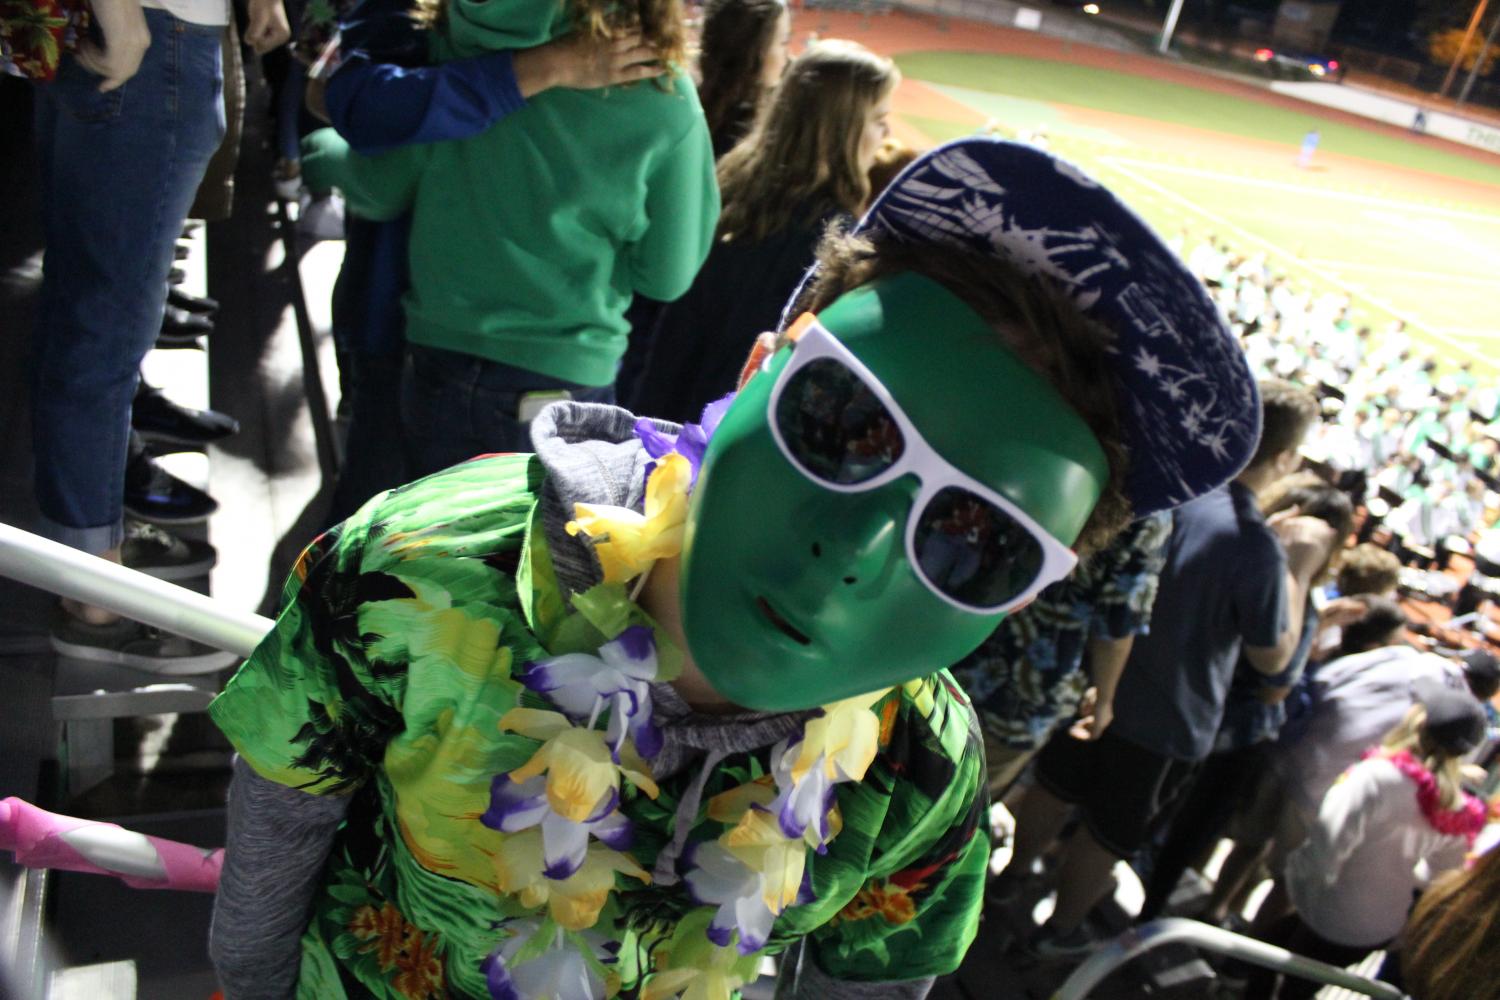 One student took his spirit to another level at last week’s game by deciding to wear a mask and Ray Bans, using a Hawaiian shirt and lei to keep with the theme. 